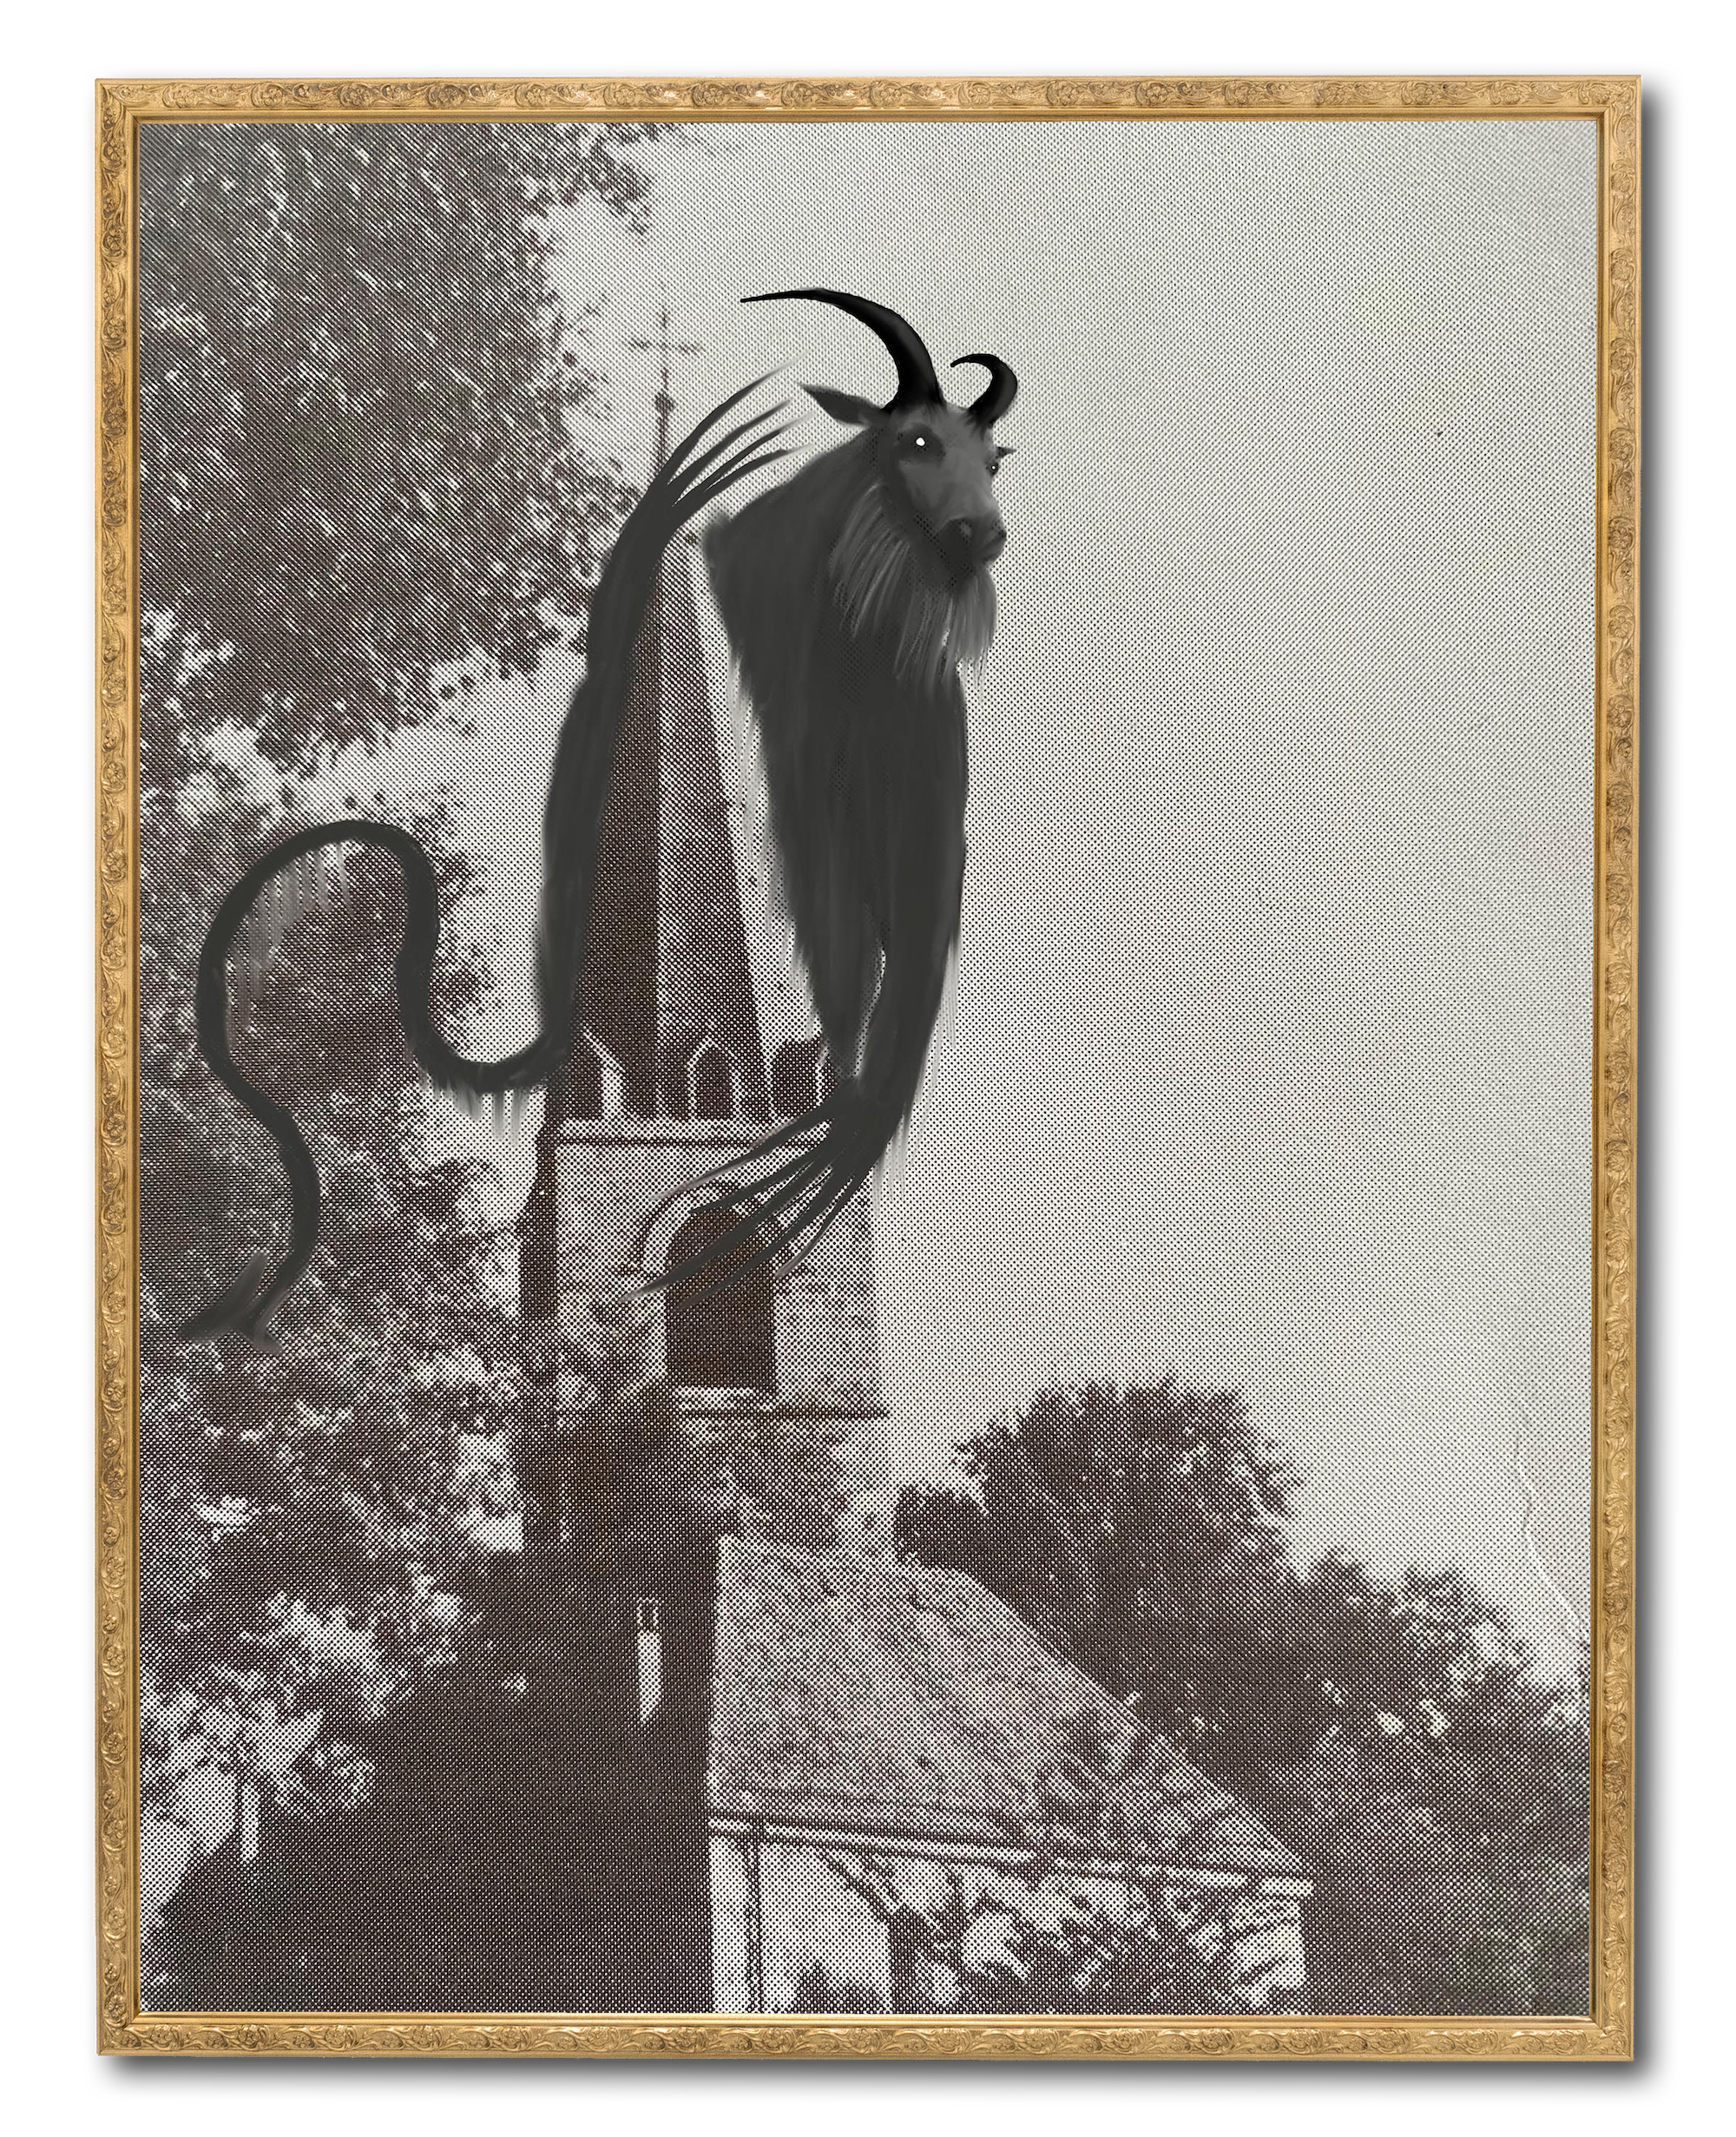 black and white photo of a church tower, with a monstrous creature drawn around it